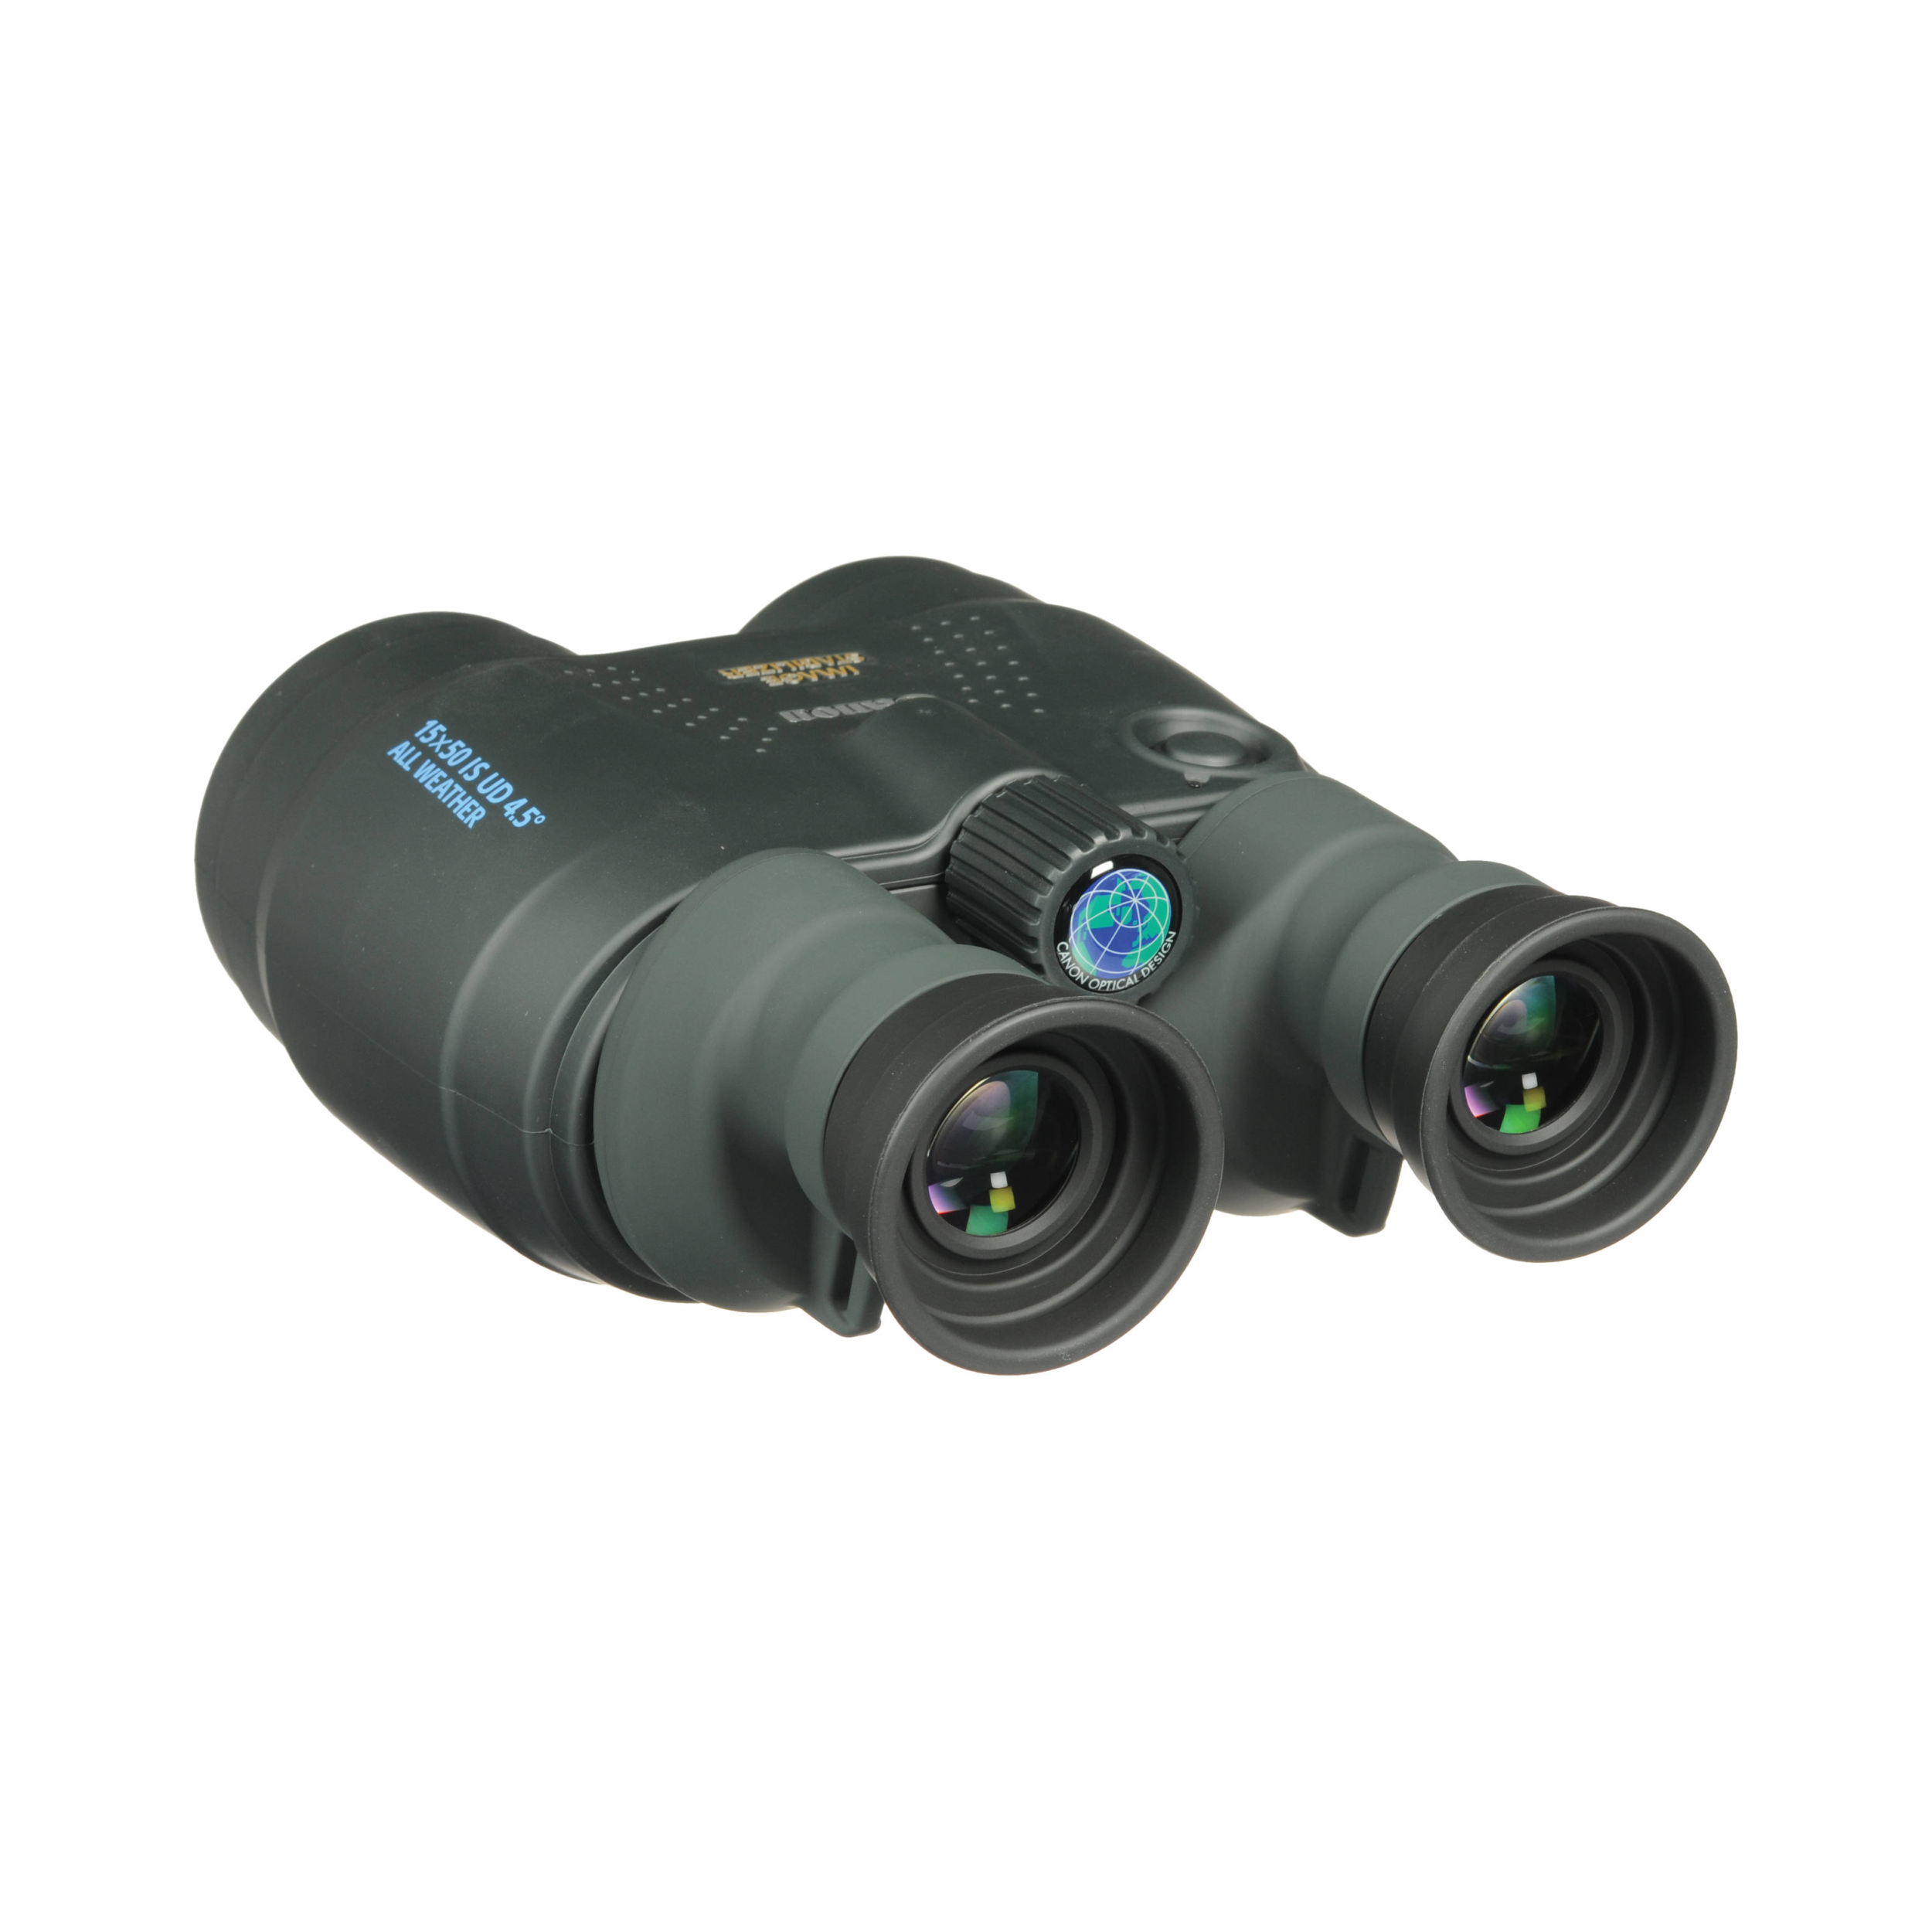 Canon 15x50 IS All-Weather Image Stabilized Binoculars - Open Box